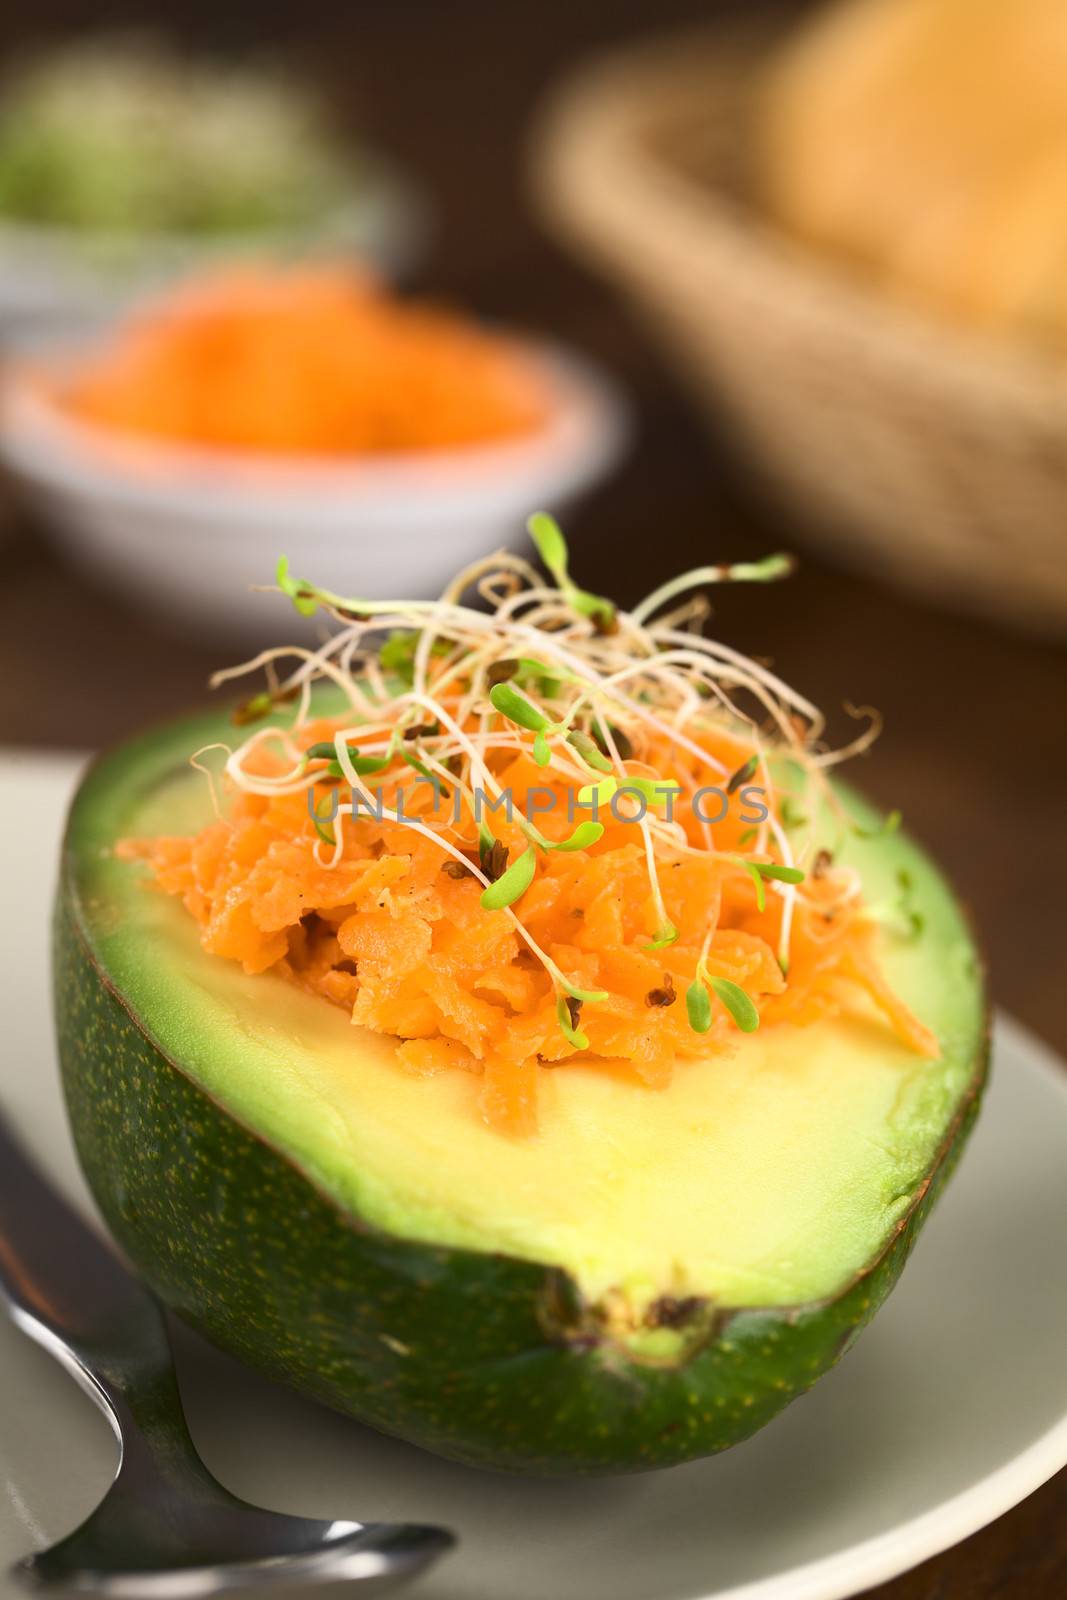 Avocado halves filled with grated carrot and sprinkled with alfalfa sprouts served on plate (Selective Focus, Focus on the front of the grated carrot) 